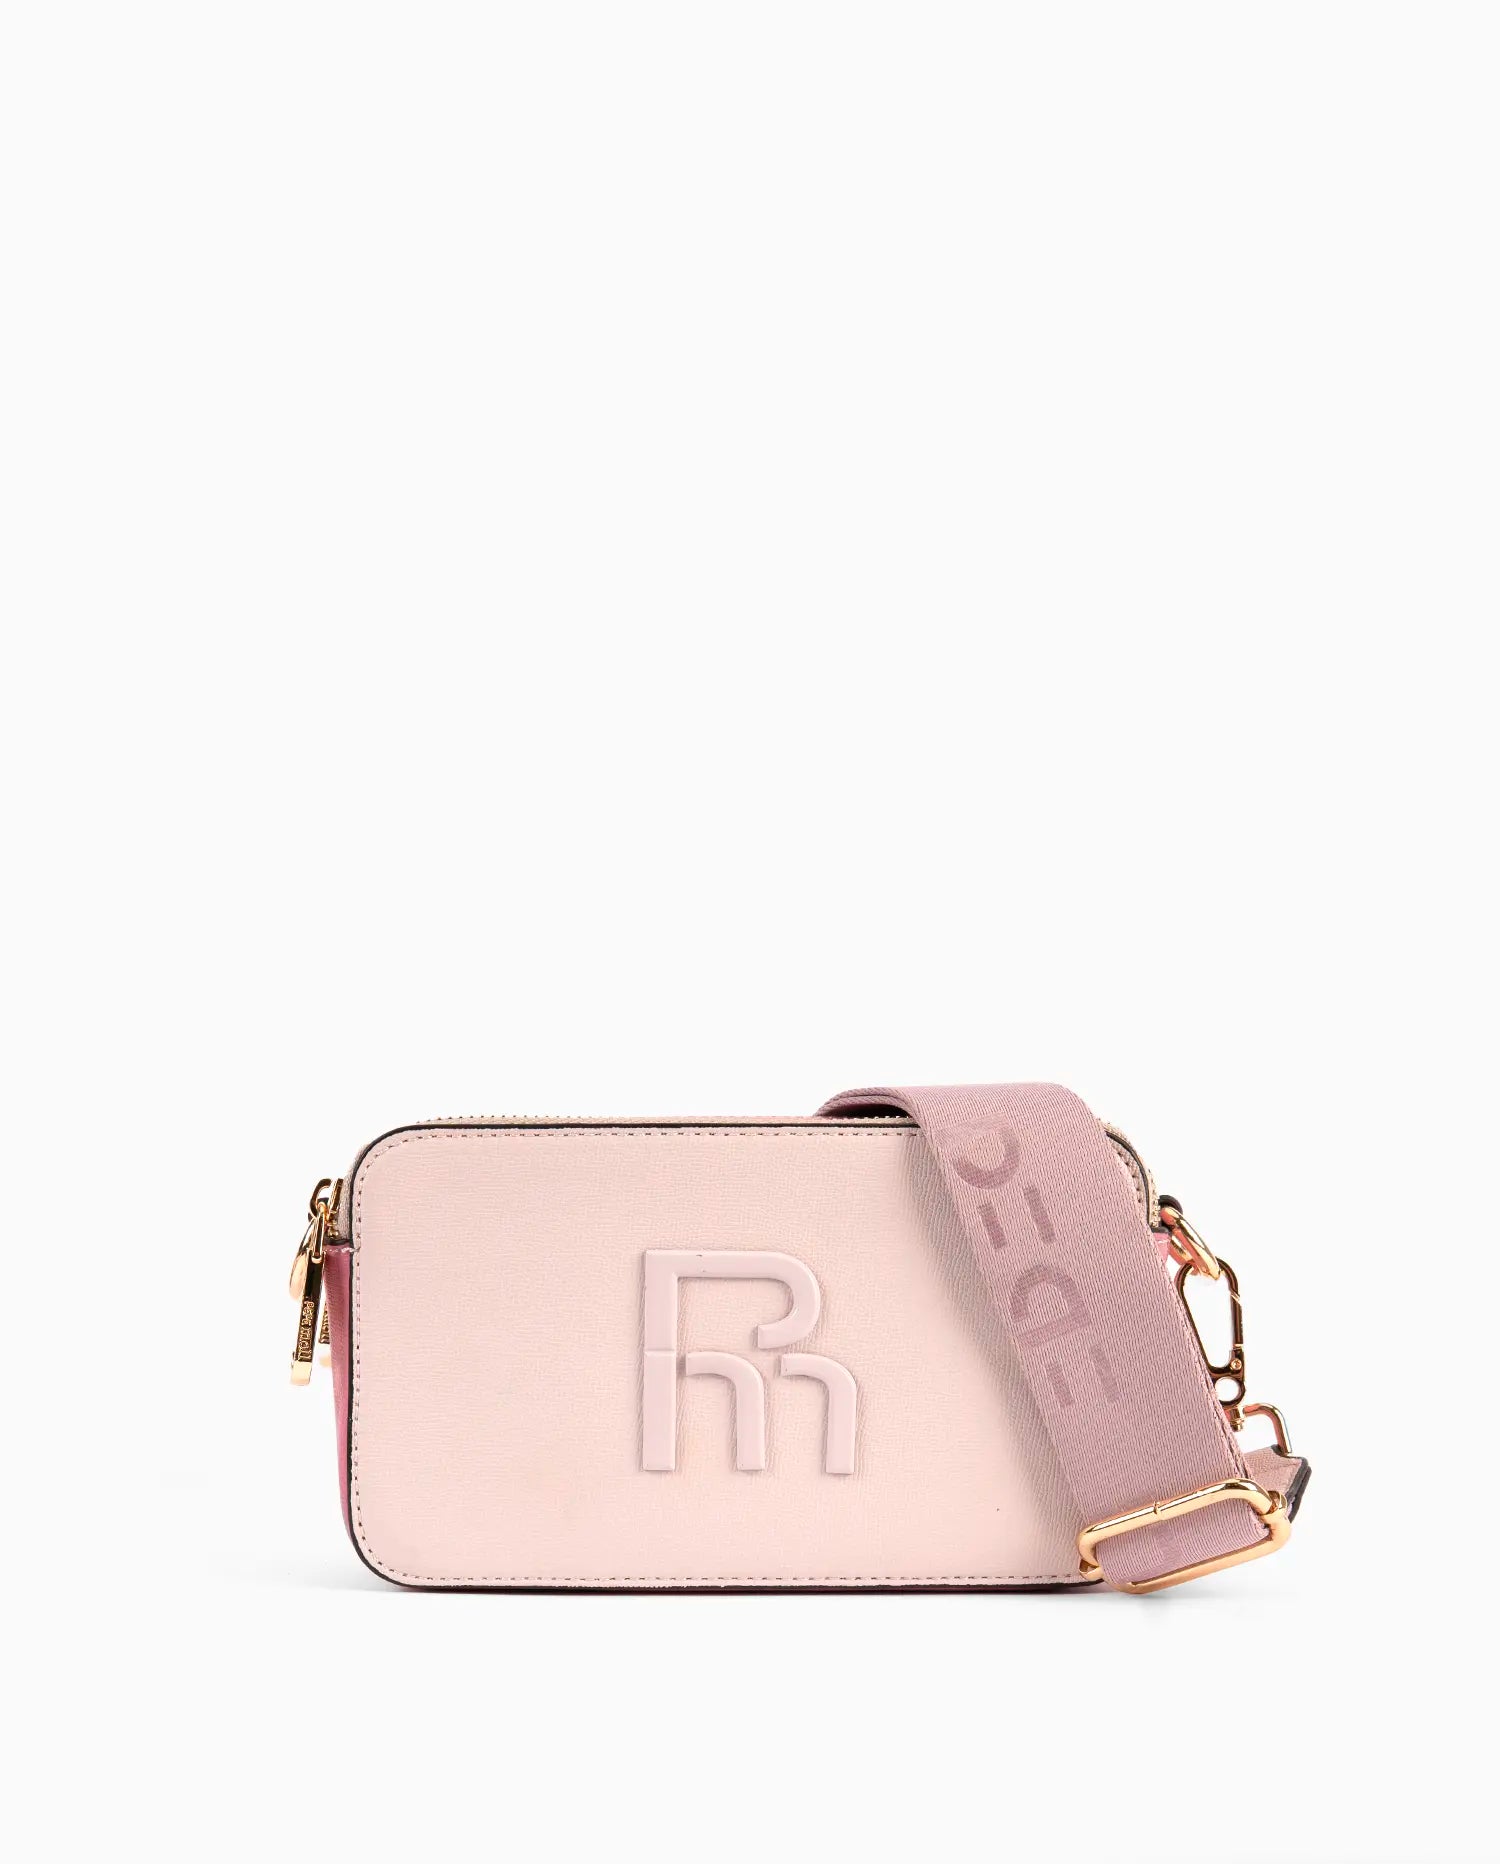 Front view of Pepe Moll crossbody bag 241360, showcasing its trendy pastel colour and compact design.